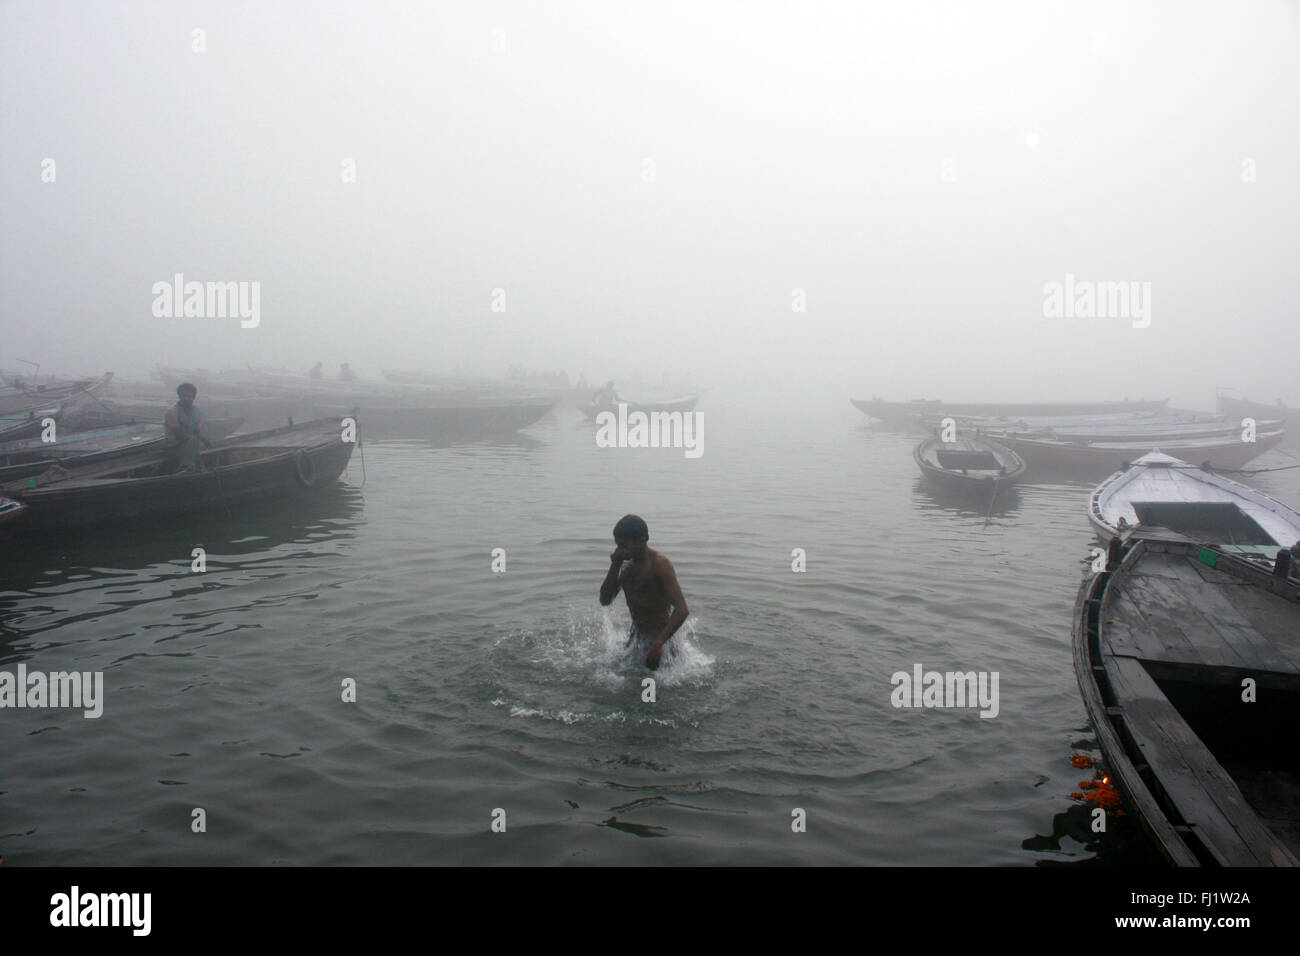 Man goes for a dip in holy water of the Ganges in Varanasi, India Stock Photo